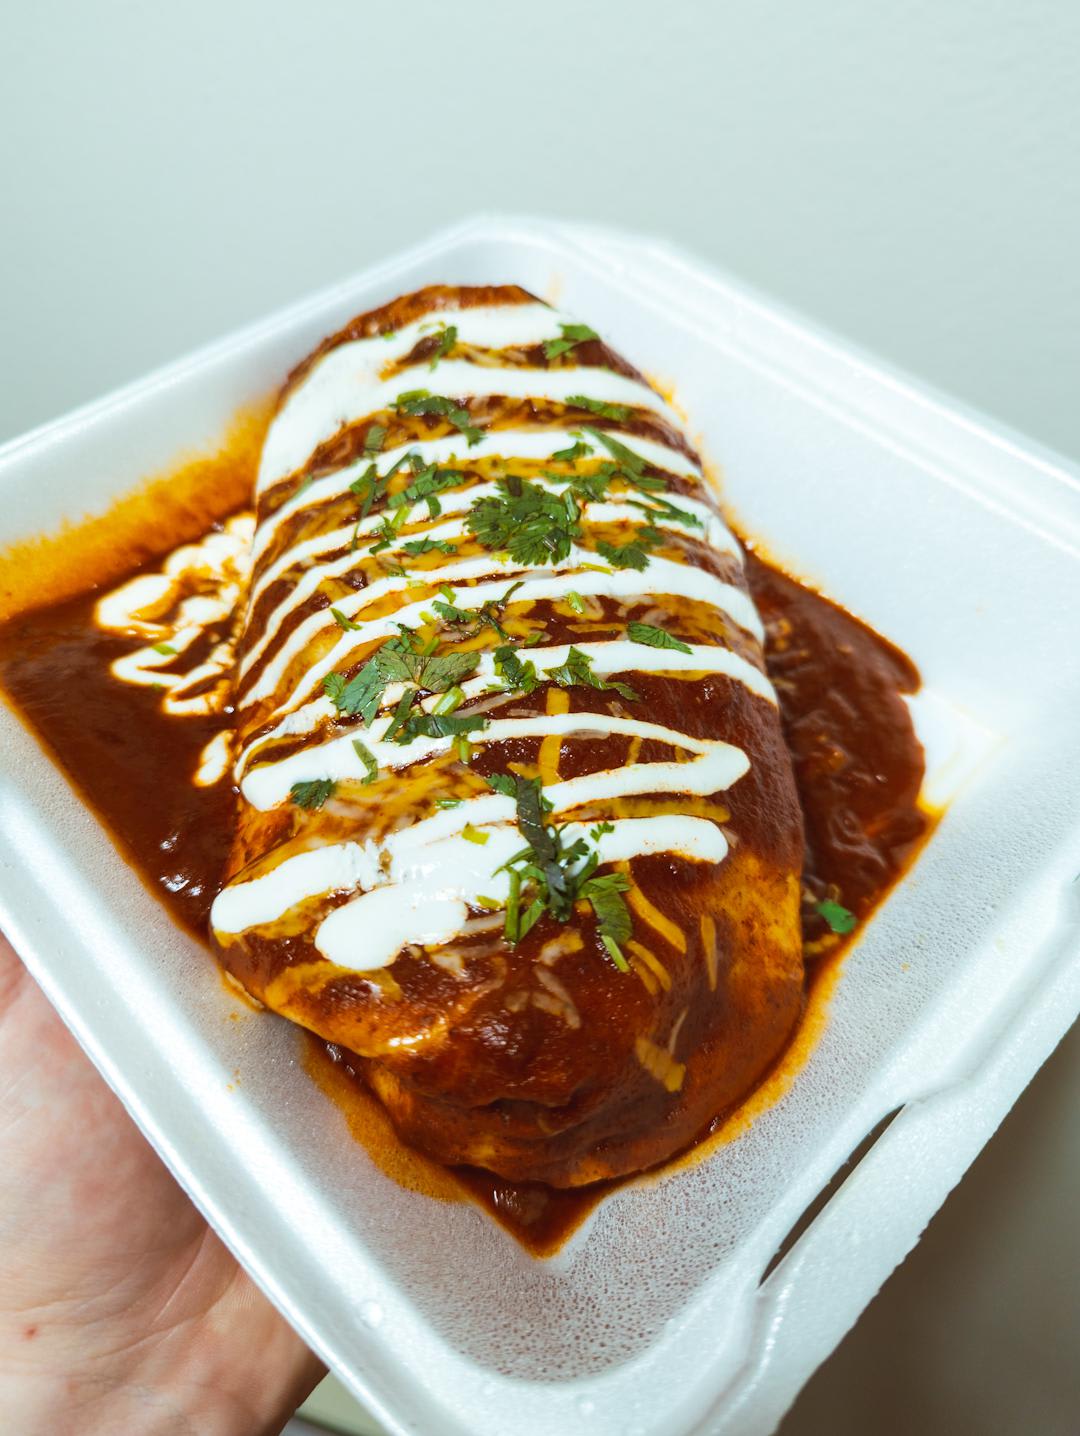 My partner and I split this massive and delicious asada wet burrito we got at a local food truck last night